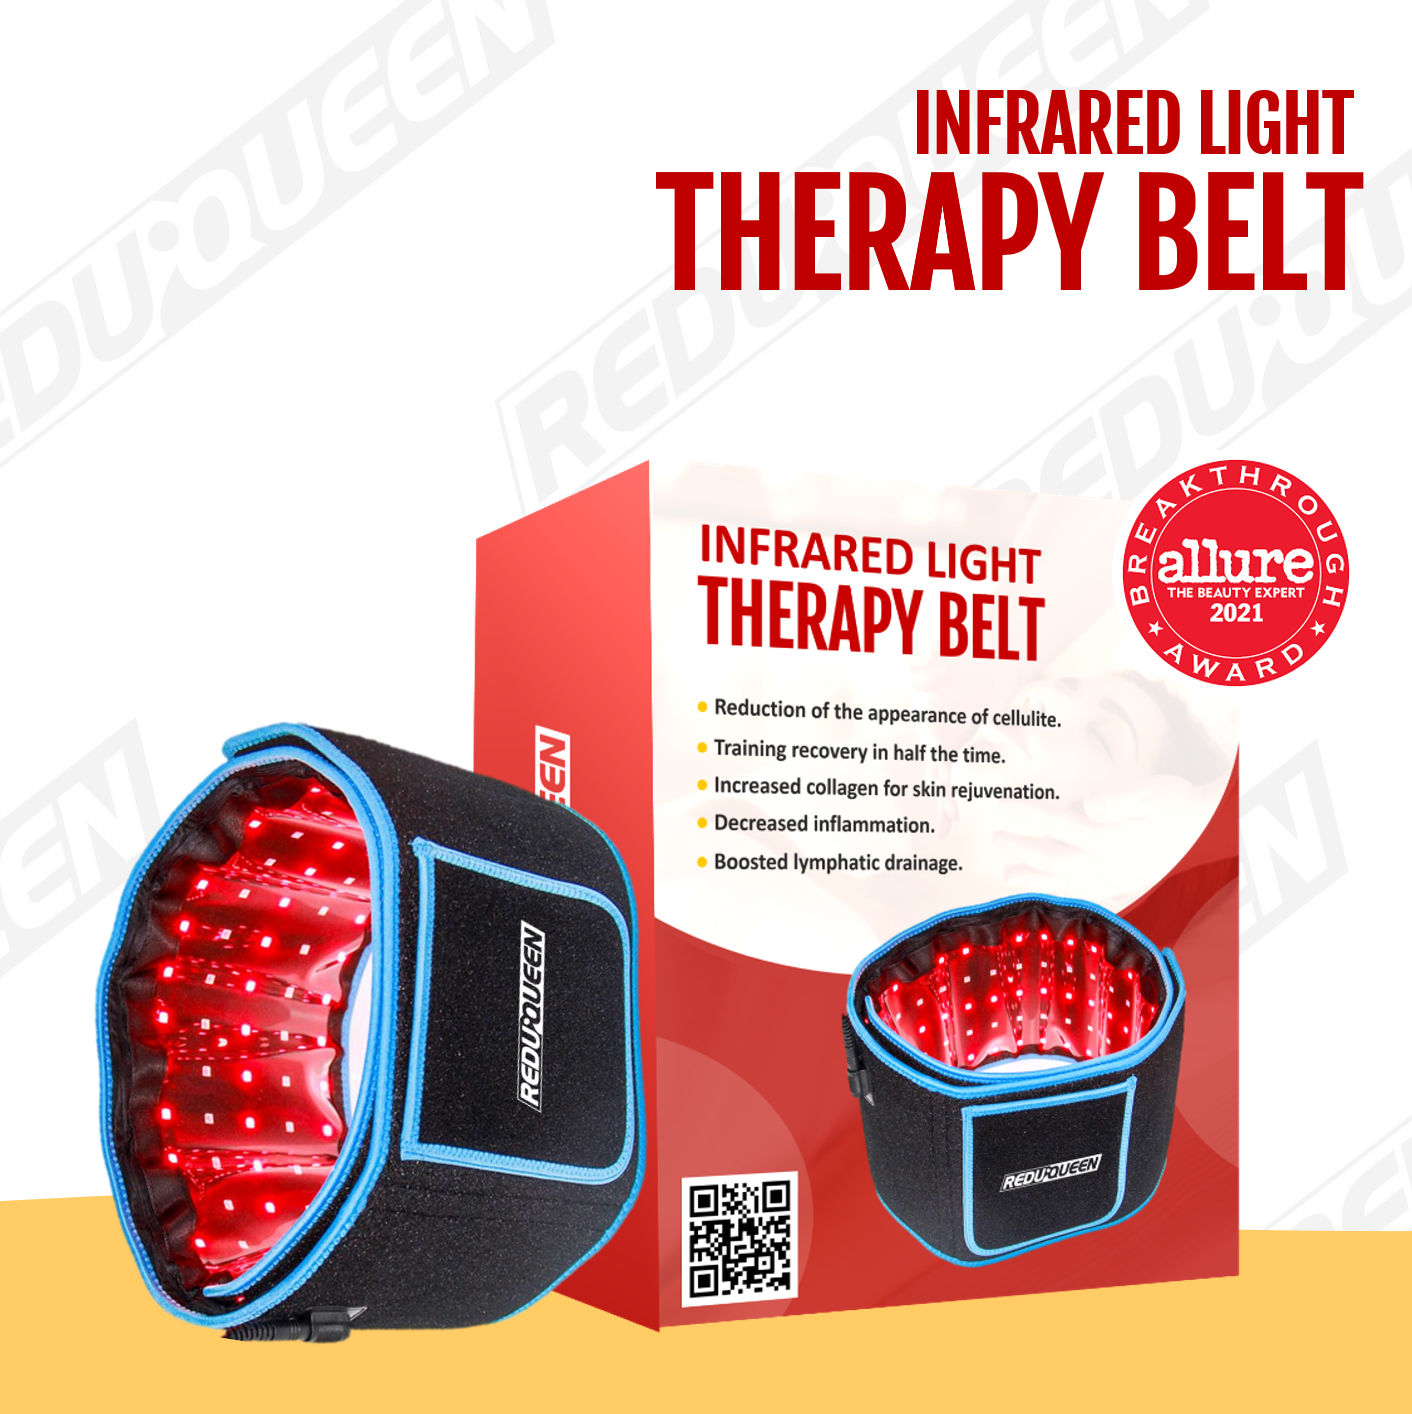 Parat levering Afstemning Infrared Light Therapy Belt™ – ReduQueen Co. All Rights Reserved.